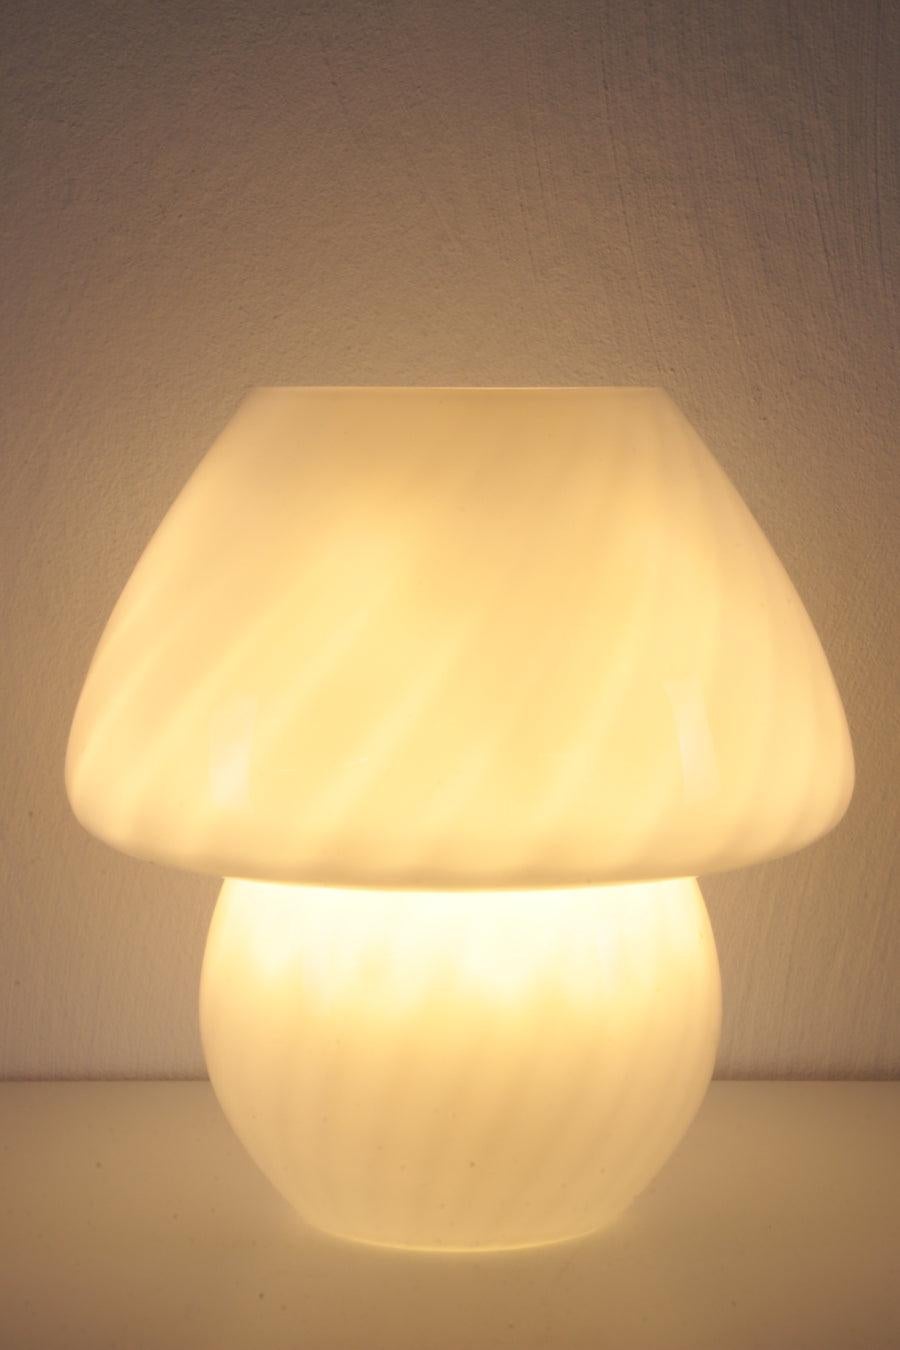 Mushroom Lamp Beautiful White Glass Model 6282

Beautiful mushroom lamp with a beautiful light made by Glashutte Germany in the 1960s.

It is bright without dazzling. With a nice soft light and a switch.

And through the opening it sheds light on